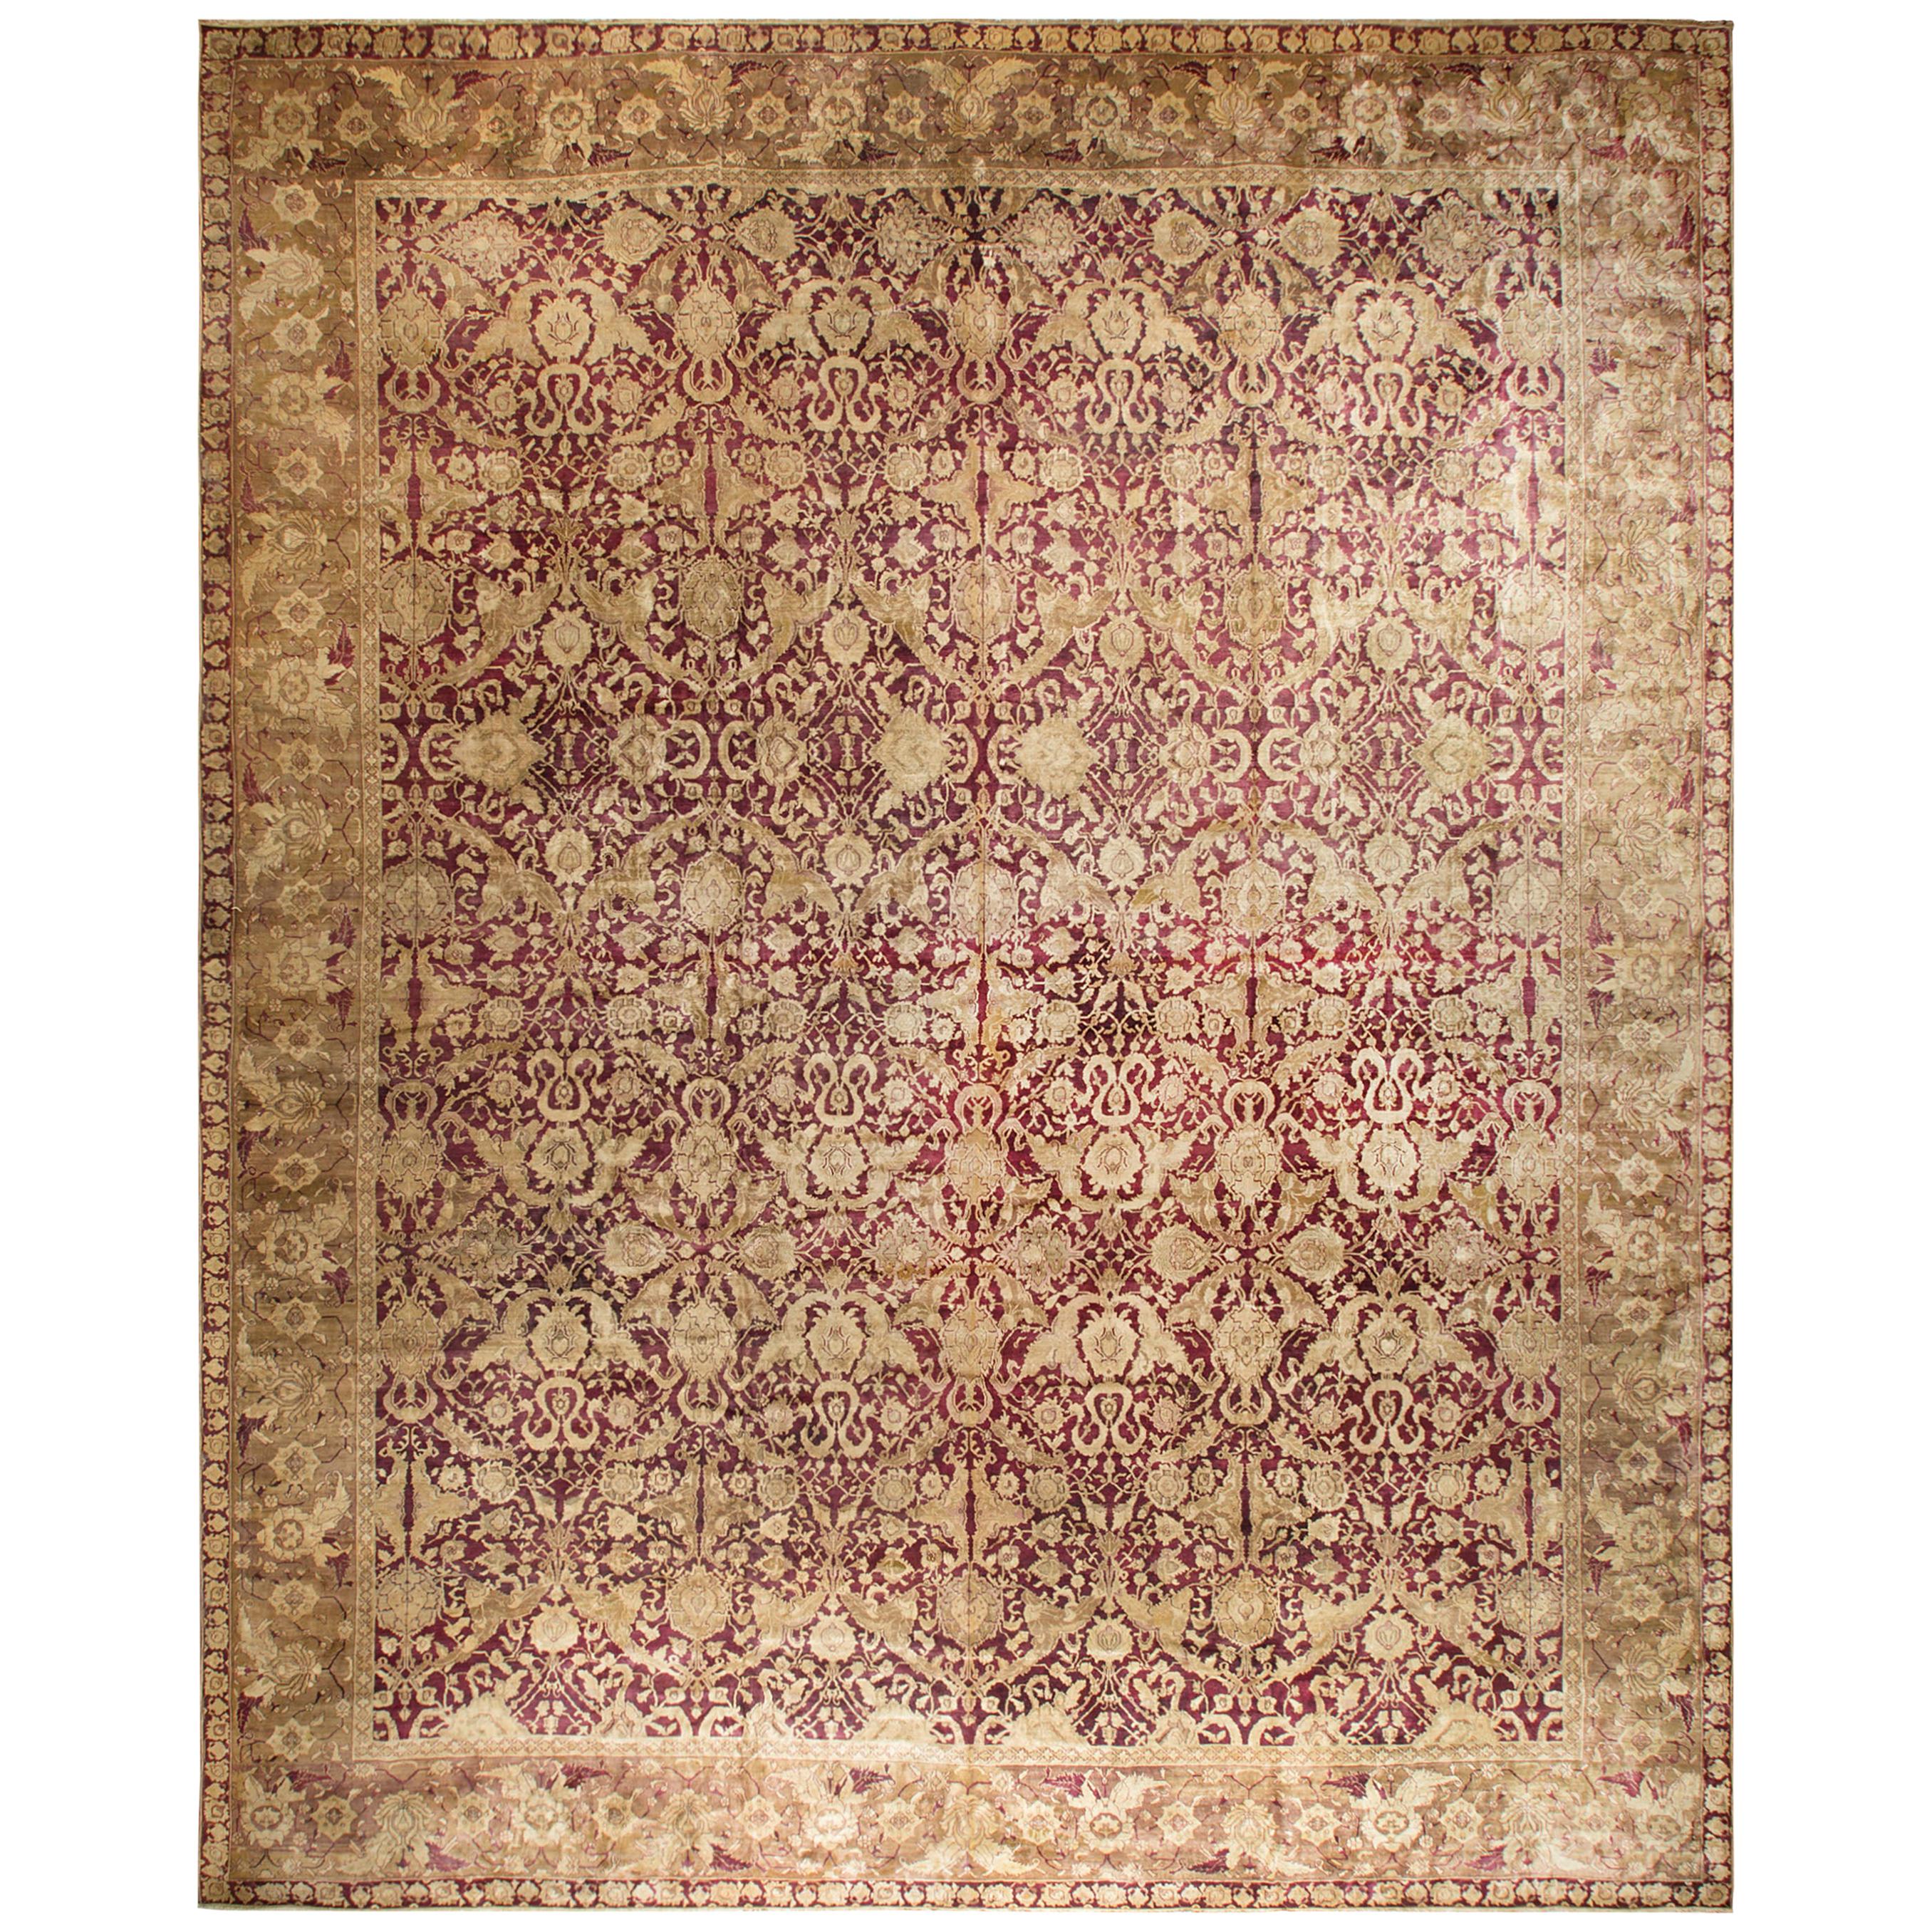 Antique Indian Agra Rug, circa 1880  21'3 x 26'6 For Sale